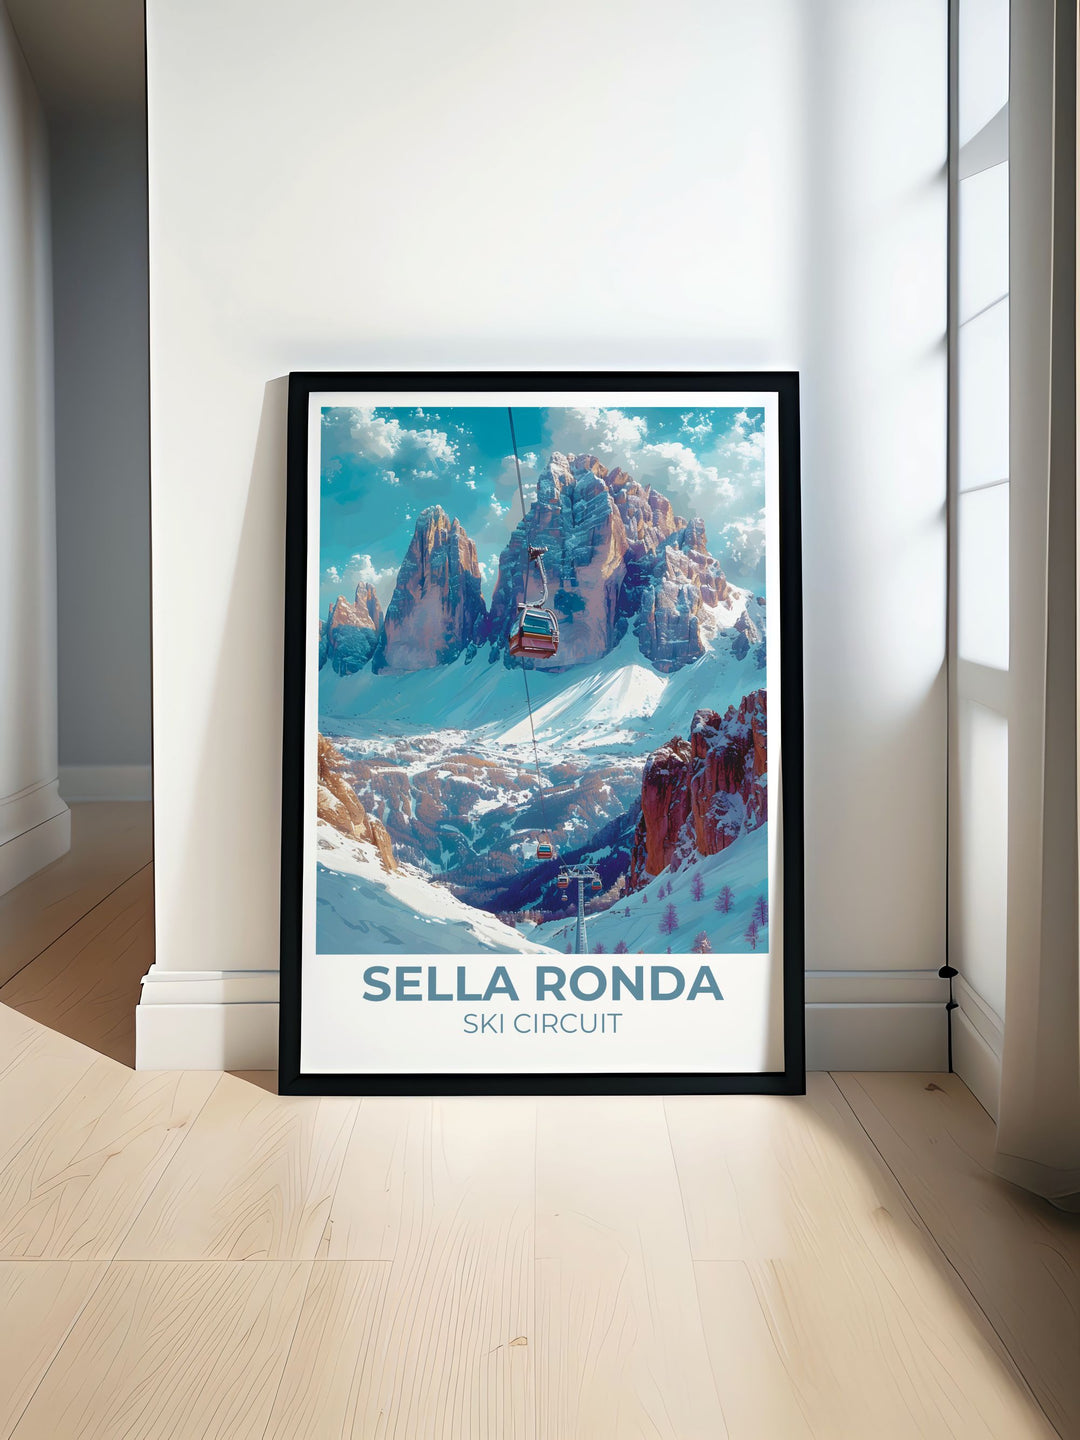 Sass Pordoi Modern Wall Decor capturing the stunning peaks and serene landscapes of the Italian Dolomites, perfect for adding natural beauty to your home decor.